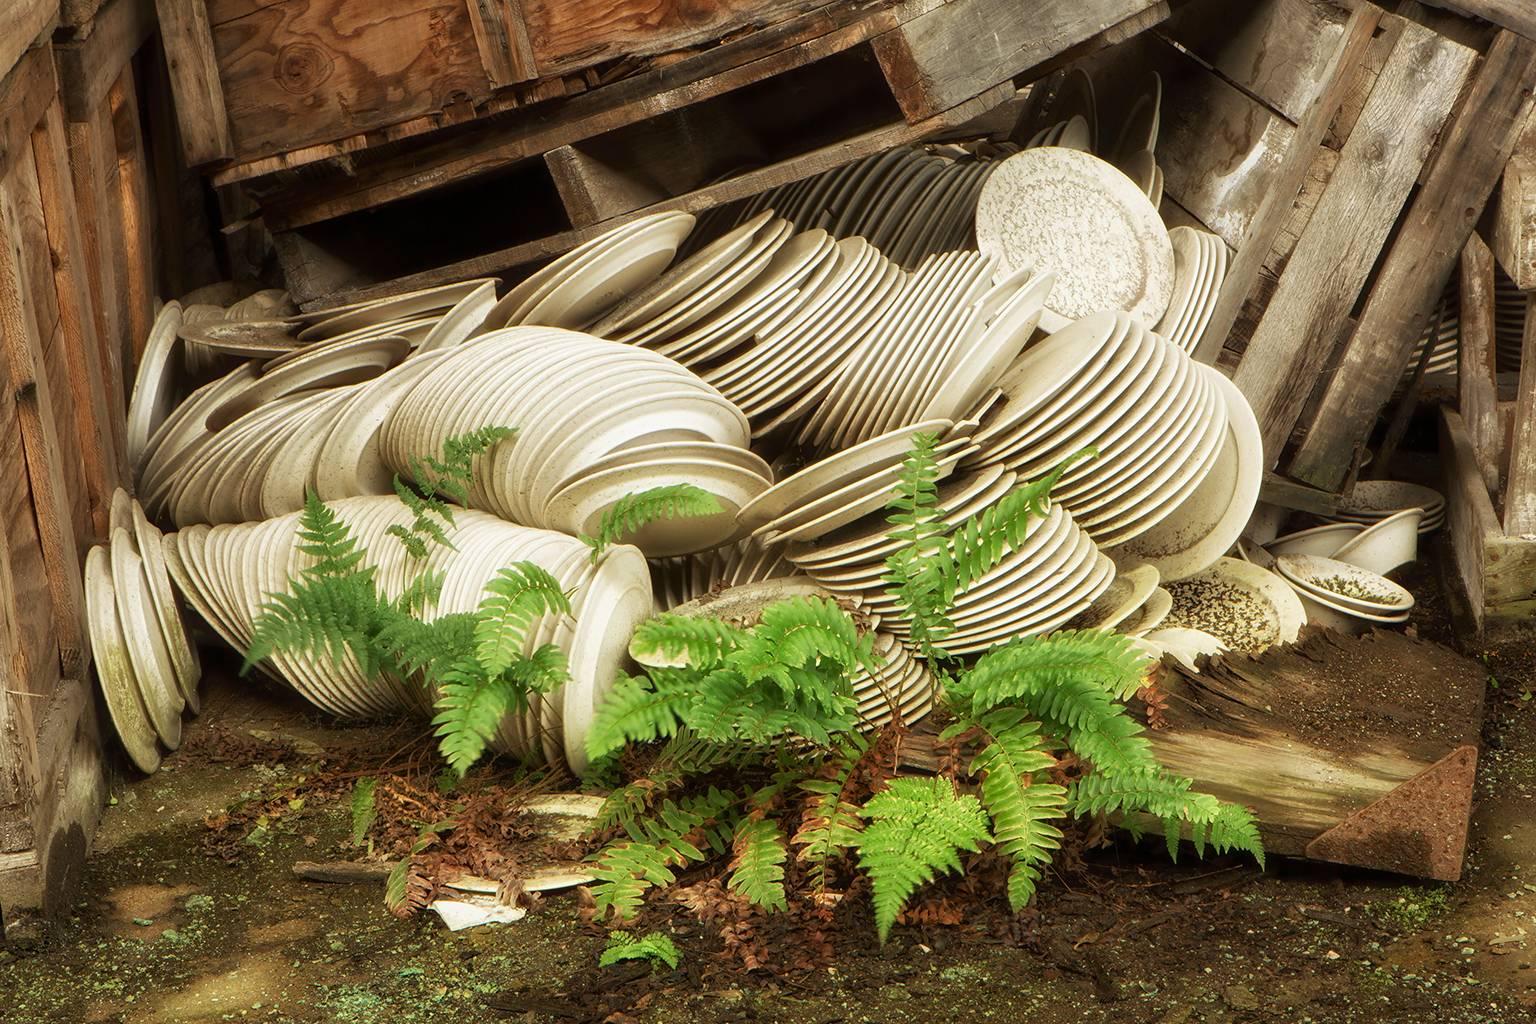 Rebecca Skinner Color Photograph - "Stacked", color photograph, abandoned, china, factory, dishes, ferns, green